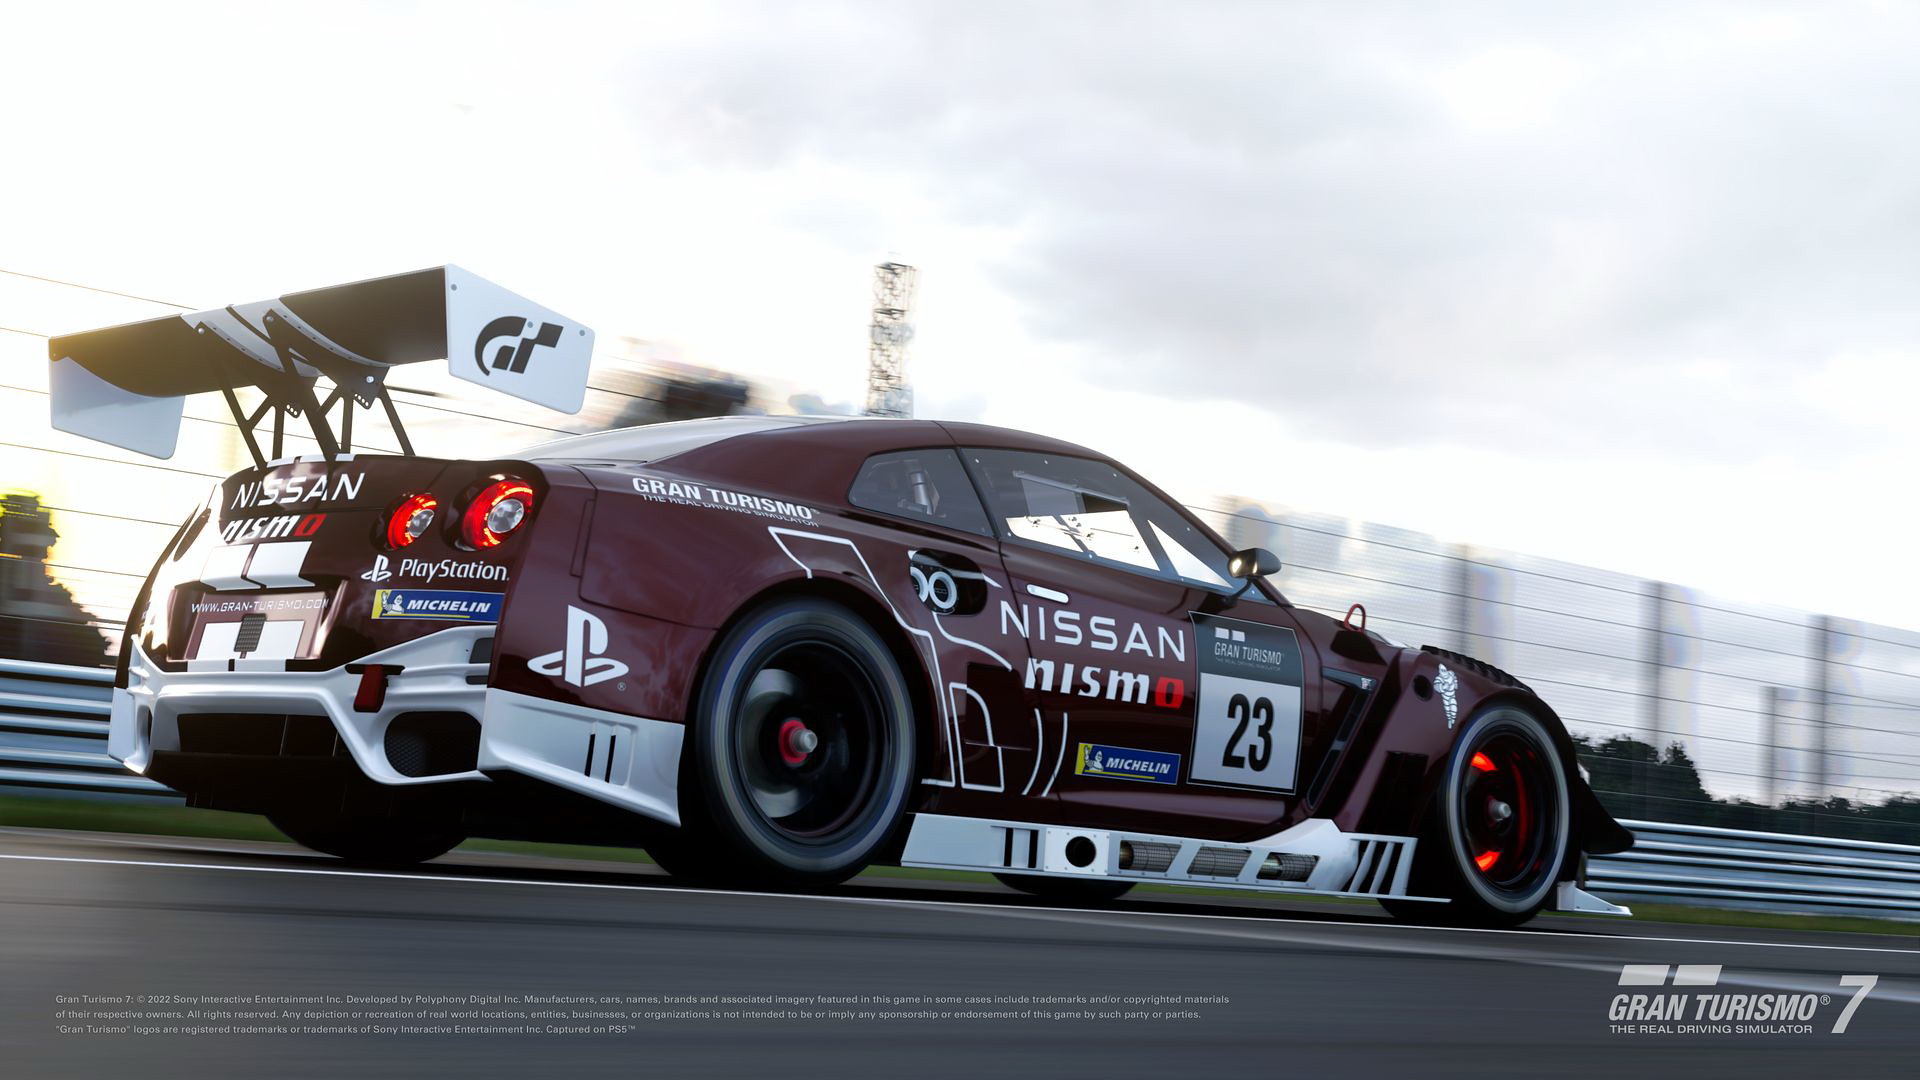 Introducing the 'Gran Turismo 7' June Update: Adding 3 New Cars and More  Music Rally Tracks! : r/granturismo